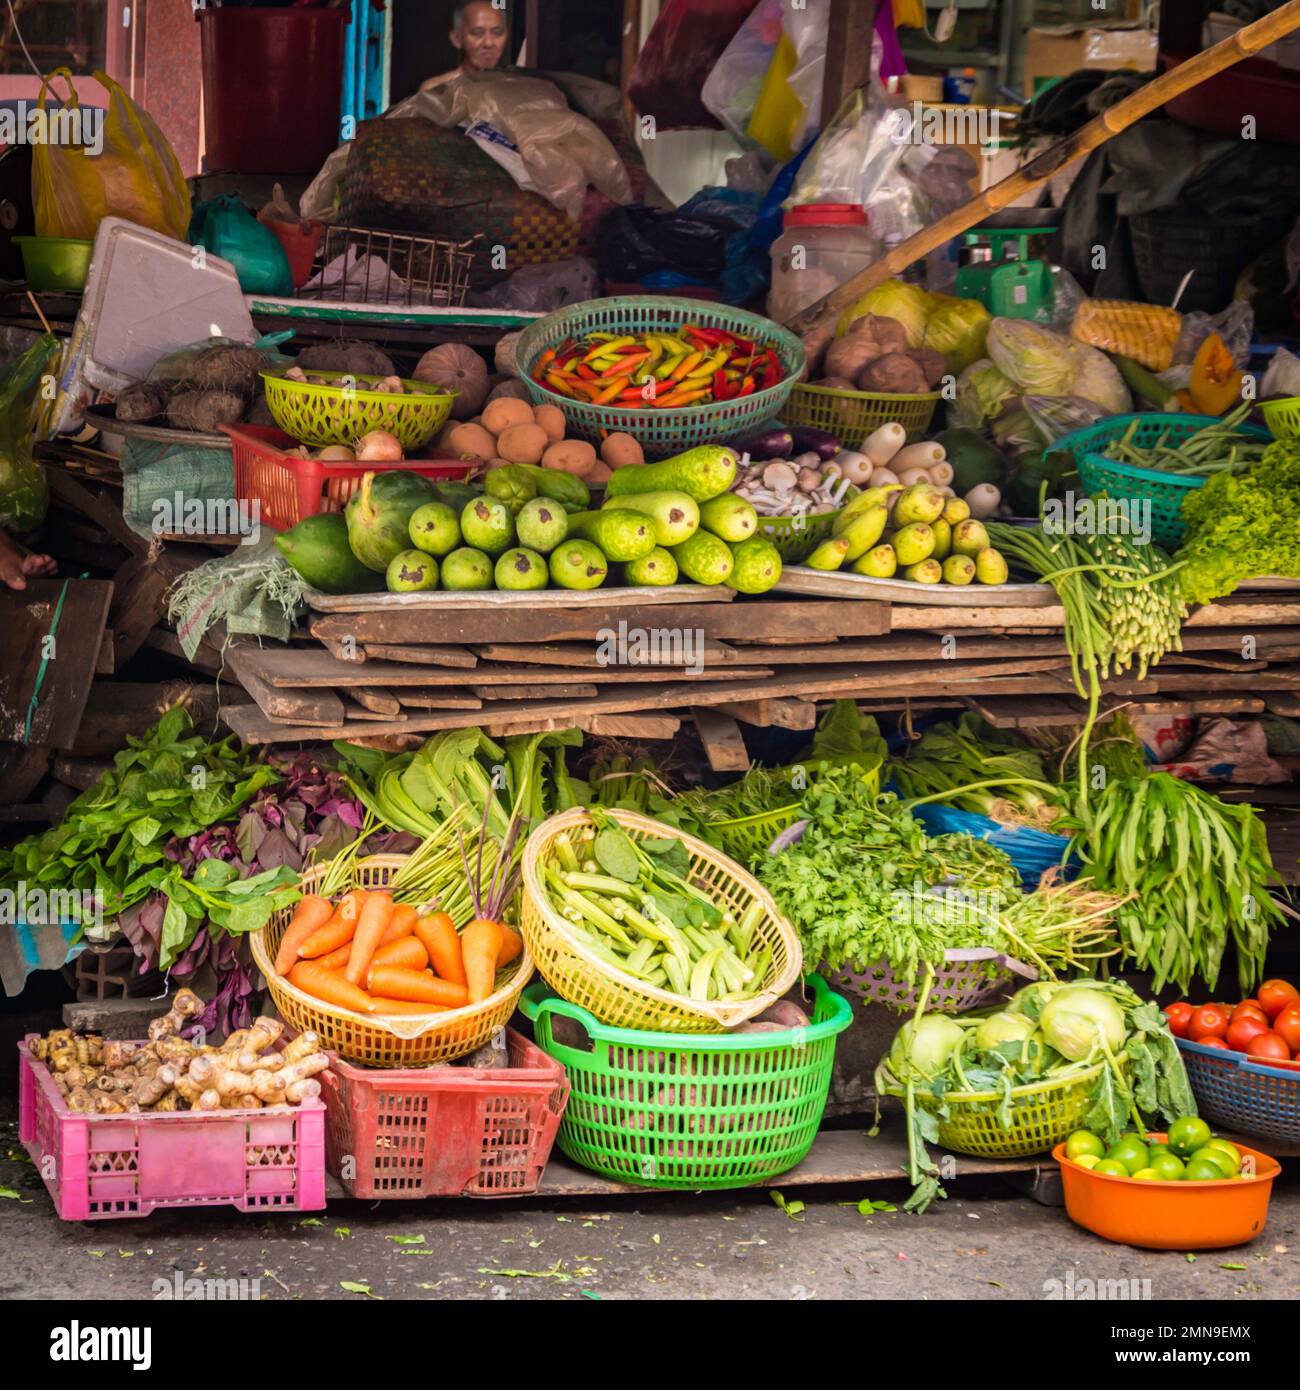 Fruit and Vegetables at market stand stall in Vietnam. Stock Photo